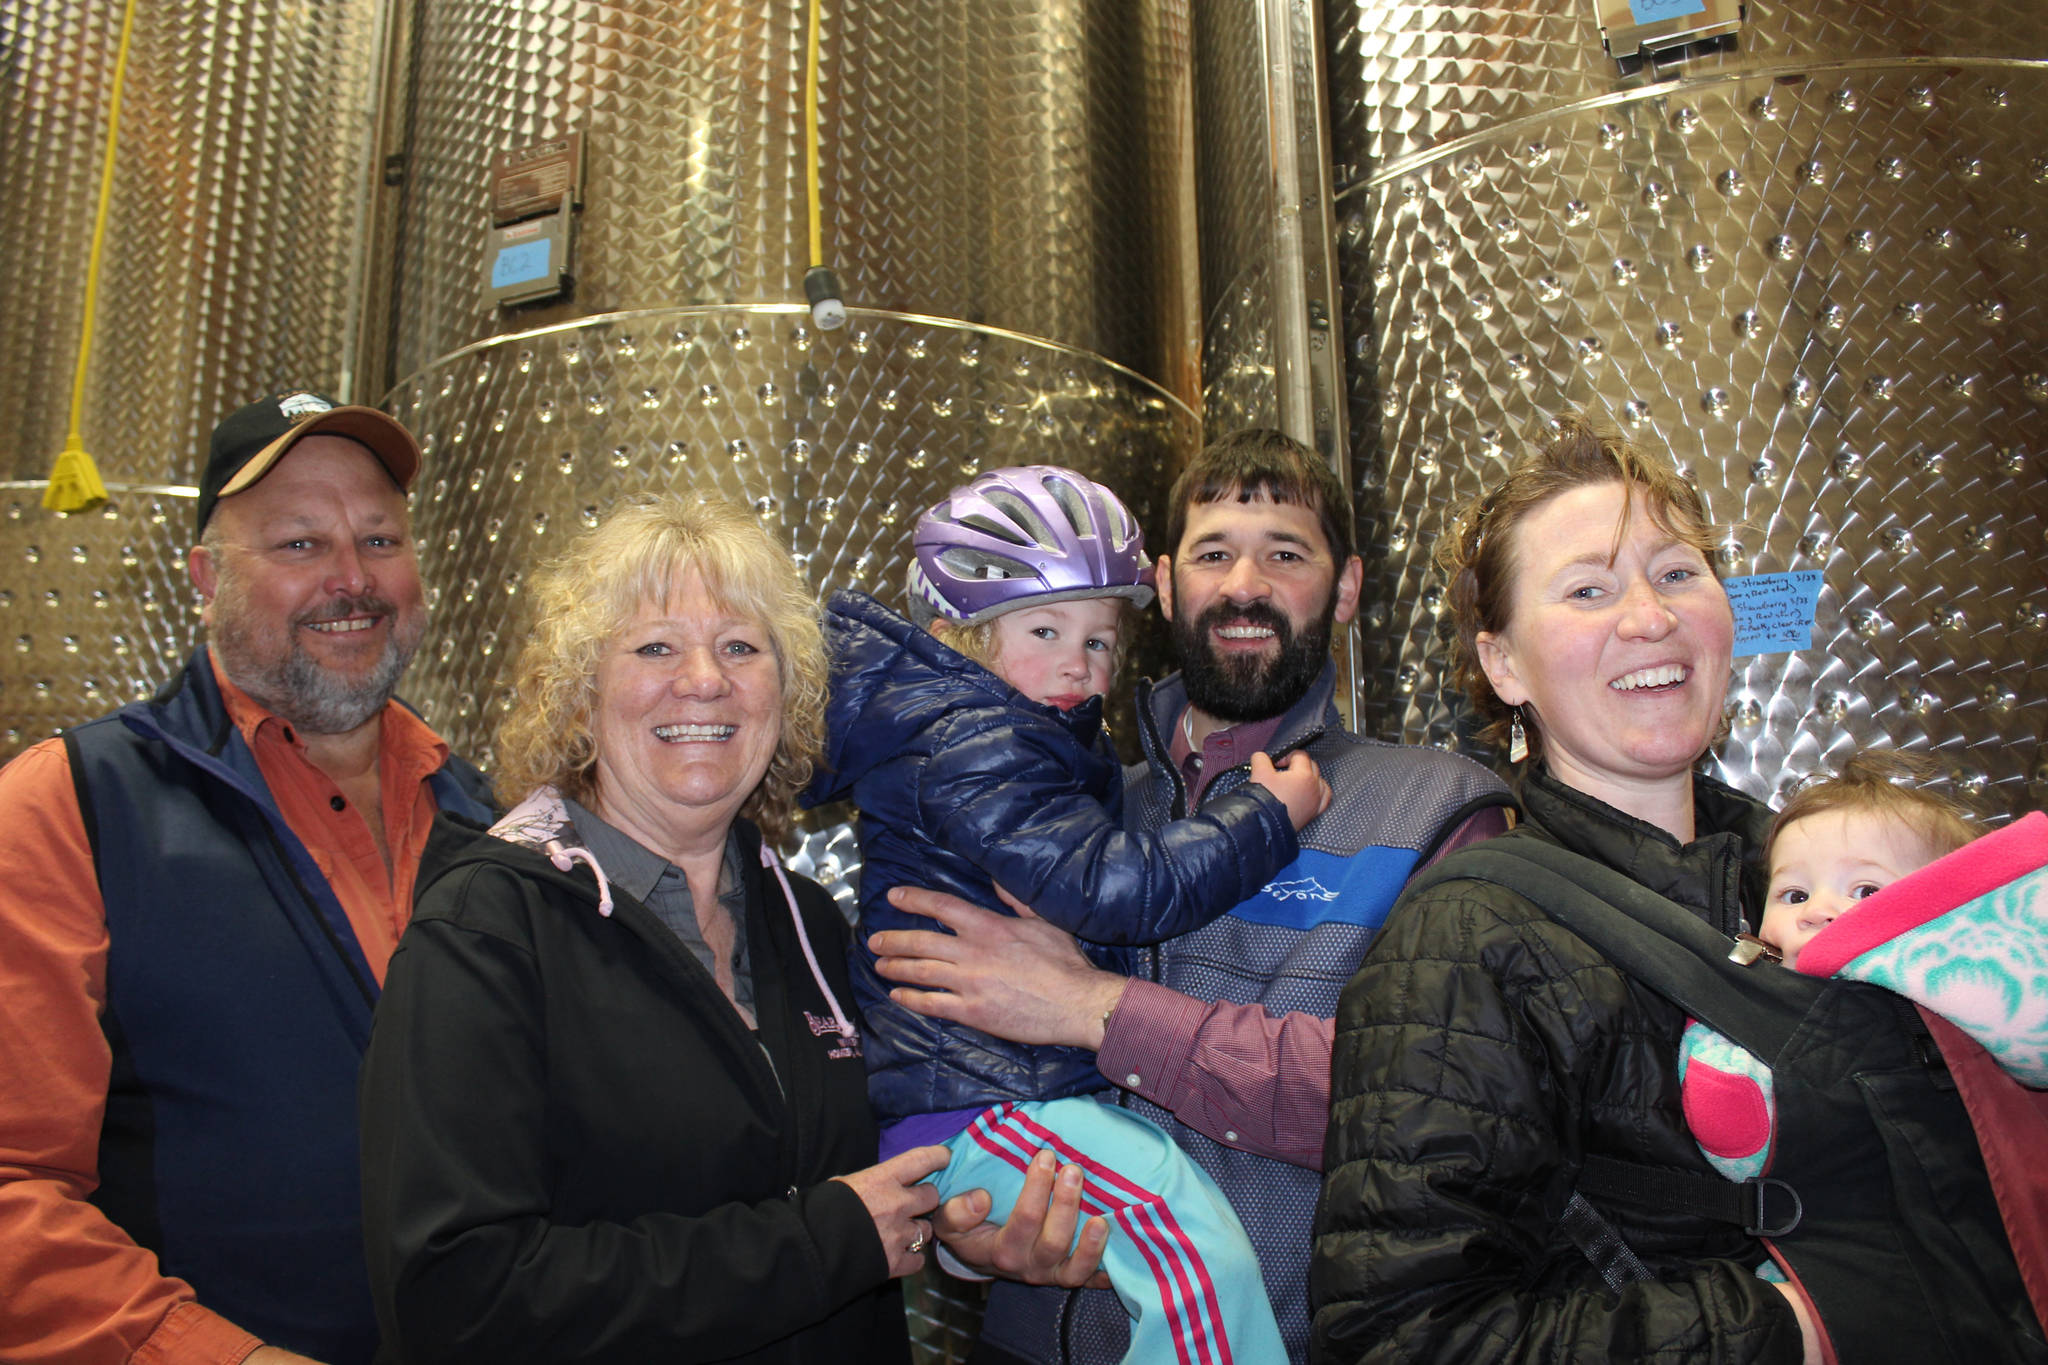 In March, Bear Creek Winery and Lodging founders Bill and Dorothy Fry, left, officially signed the business over to their son-in-law and daughter Louis and Jasmine Maurer, shown here with their two daughters, Maggie, 4, and Aurora, six months. They posed for a photo on April 17, 2019, at the winery in Kachemak City, Alaska. (Photo by McKibben Jackinsky)